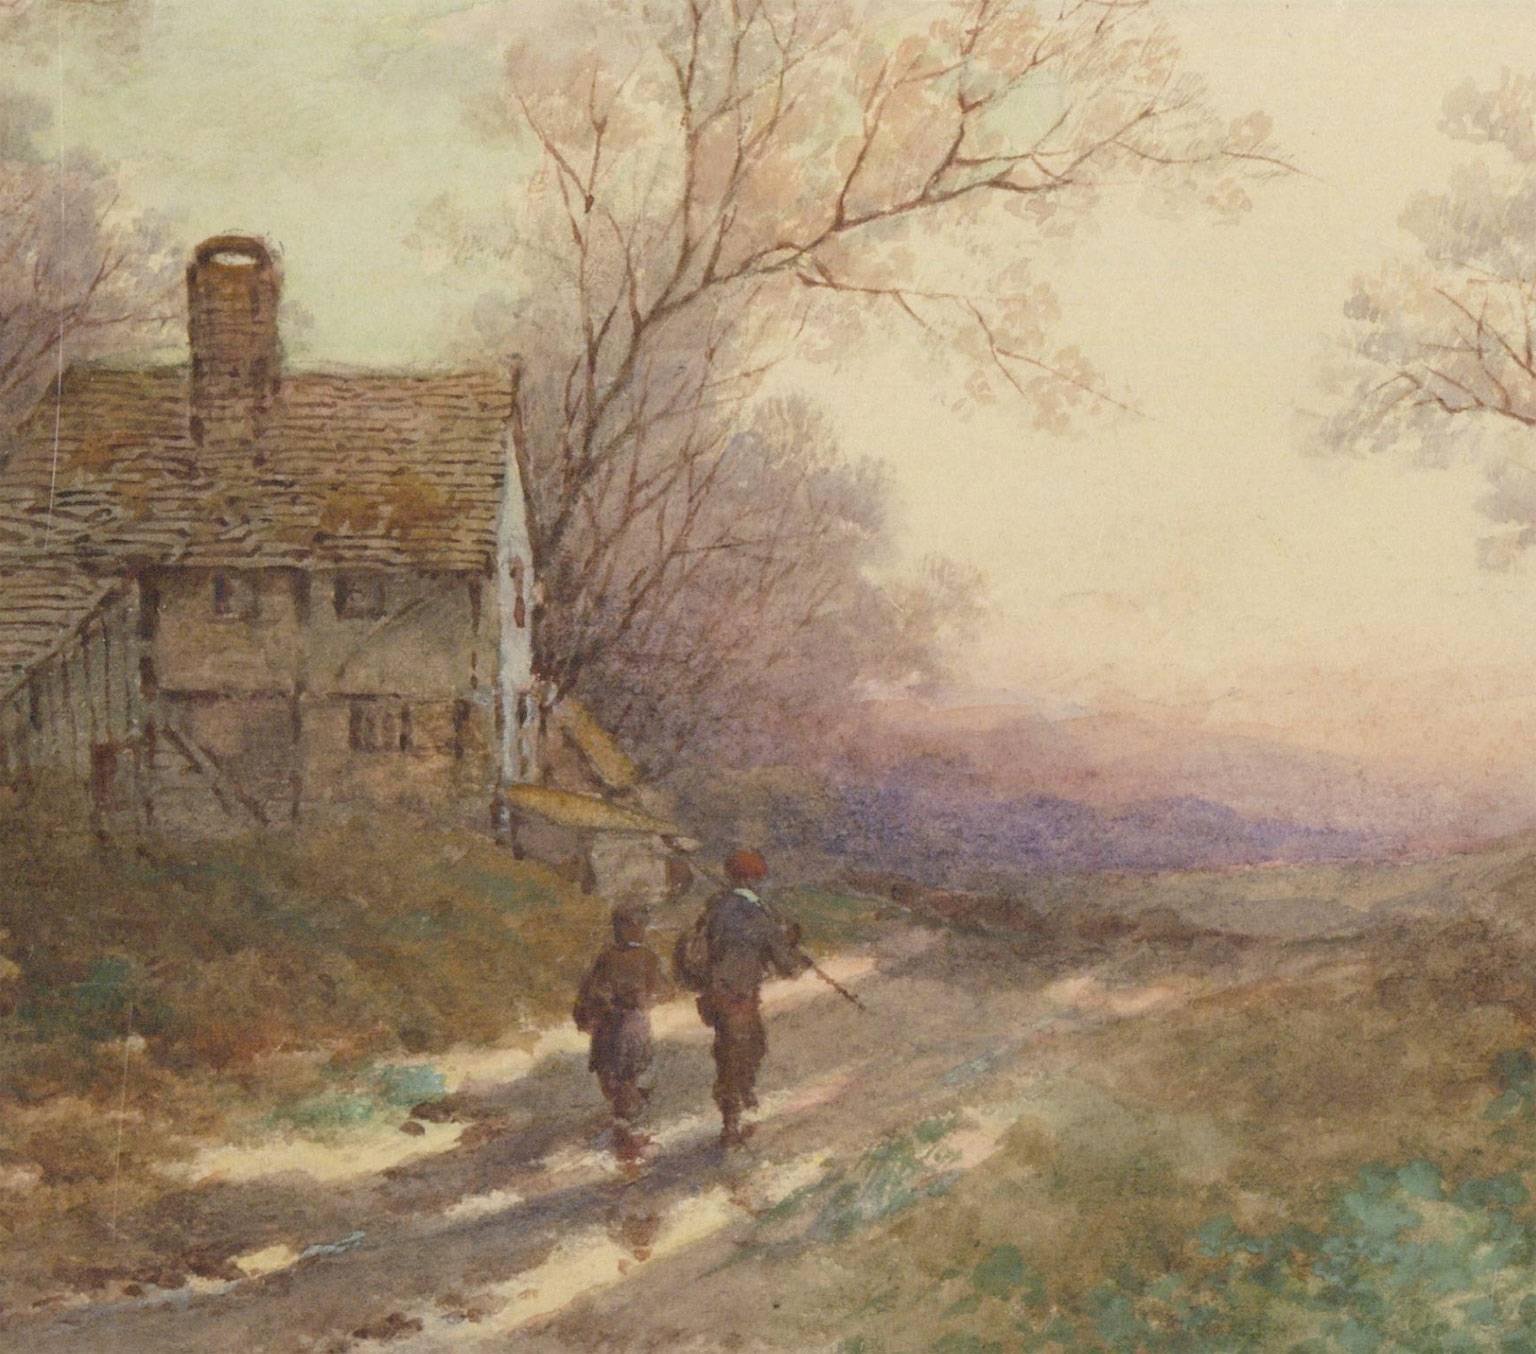 An excellent pair of late 19th century English watercolours by listed artist Stephen James Bowers. The delicate handling of the medium and romantic compositions are typical of Bowers' style, presenting a quaint vision of the English countryside.